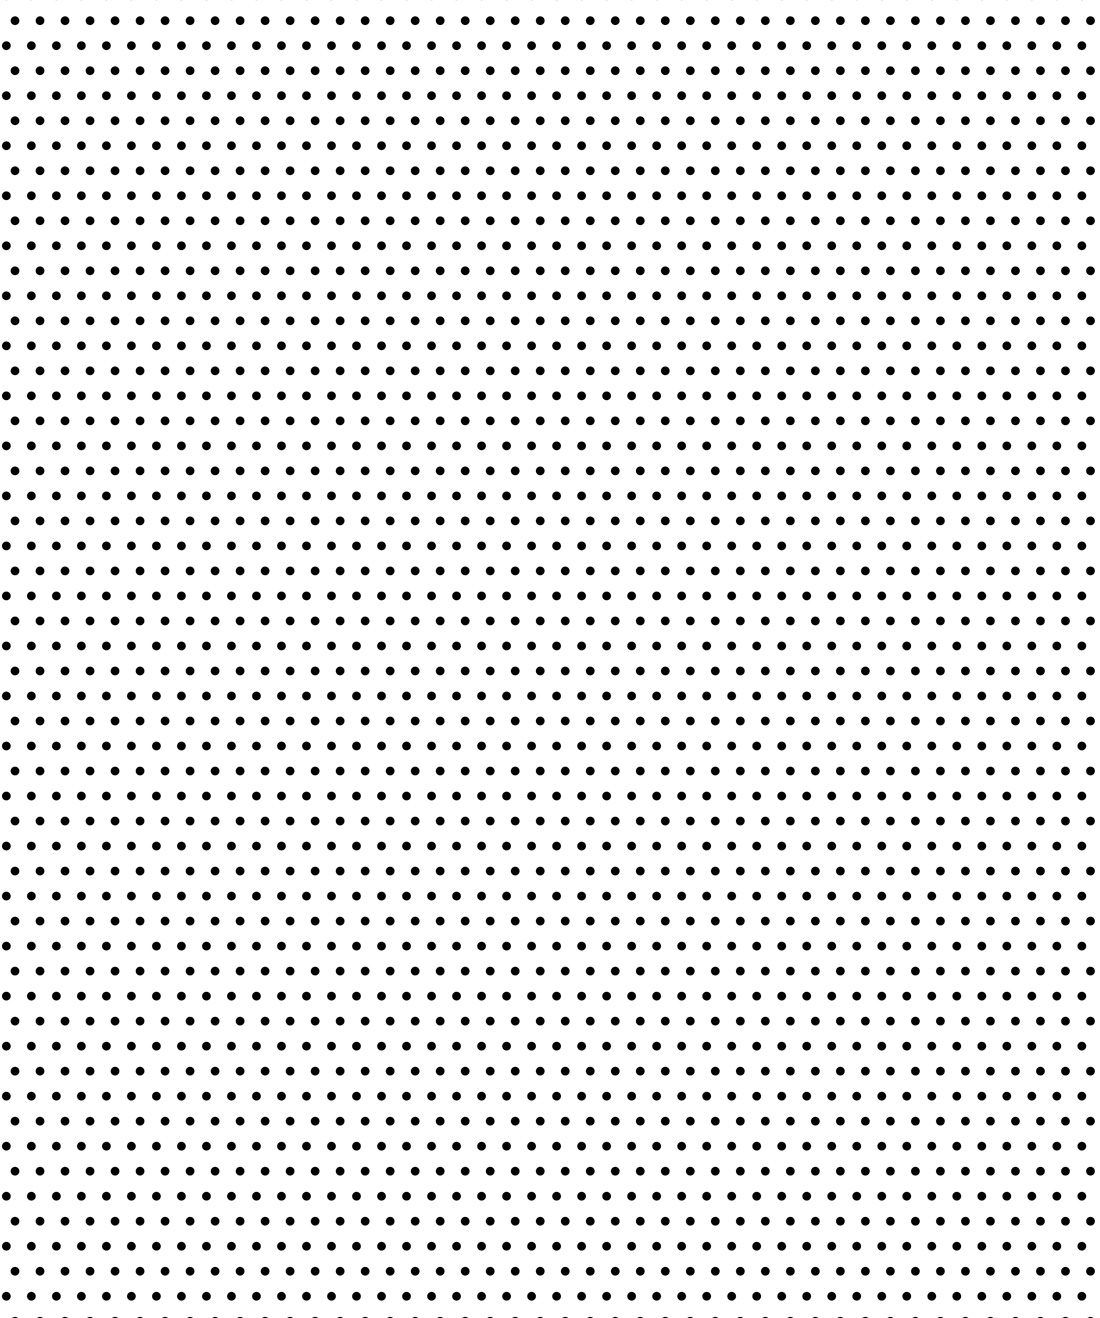 Simplimente Puntos is a black and white dot wallpaper